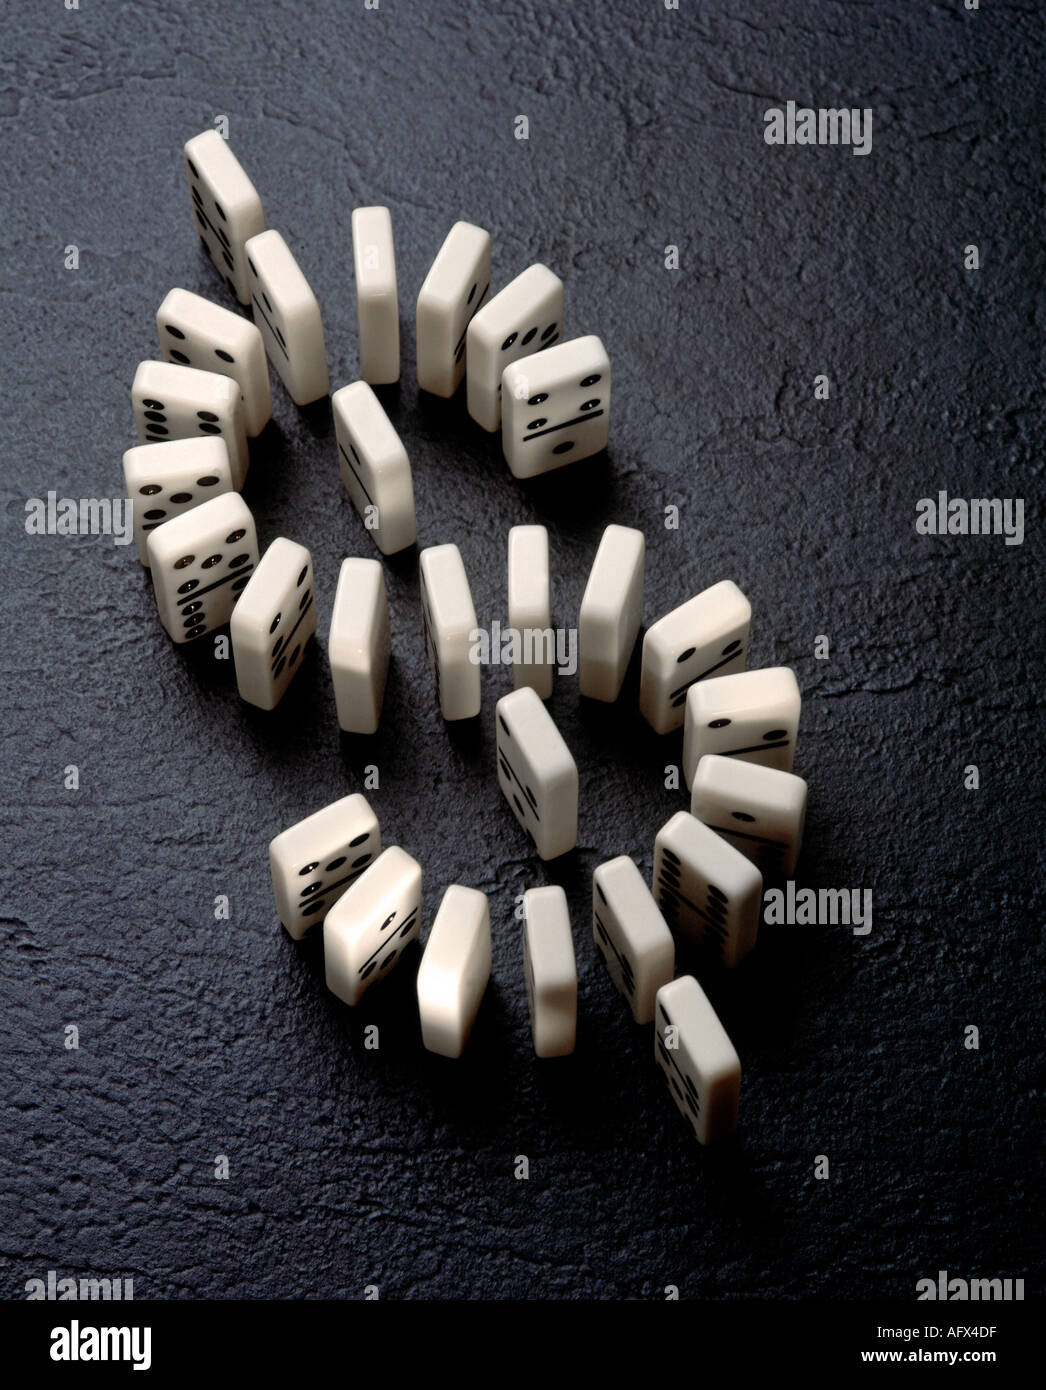 American dollar sign made from dominoes Stock Photo